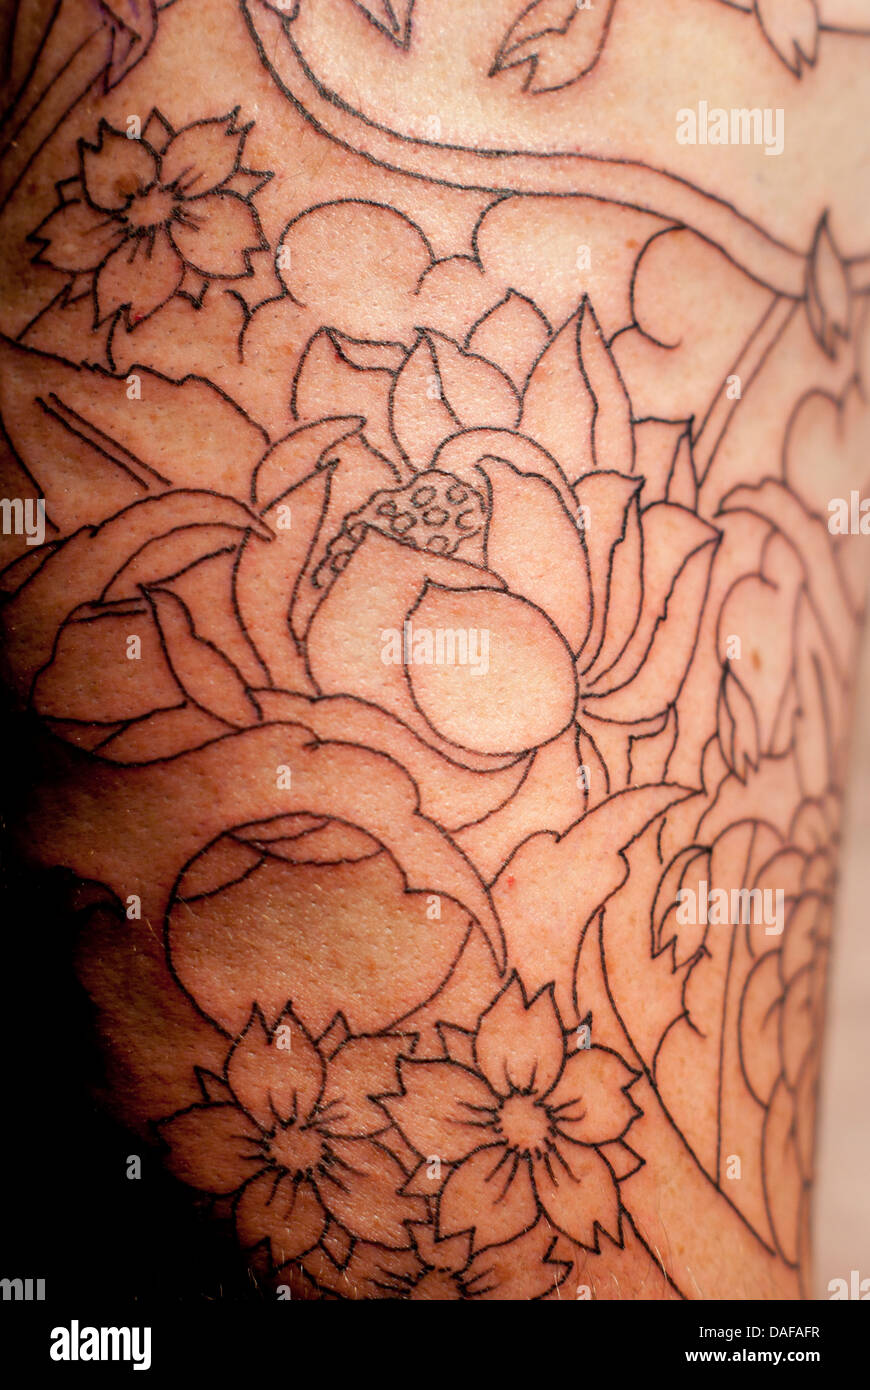 Close-up of a Japanese tattoo outline. Stock Photo